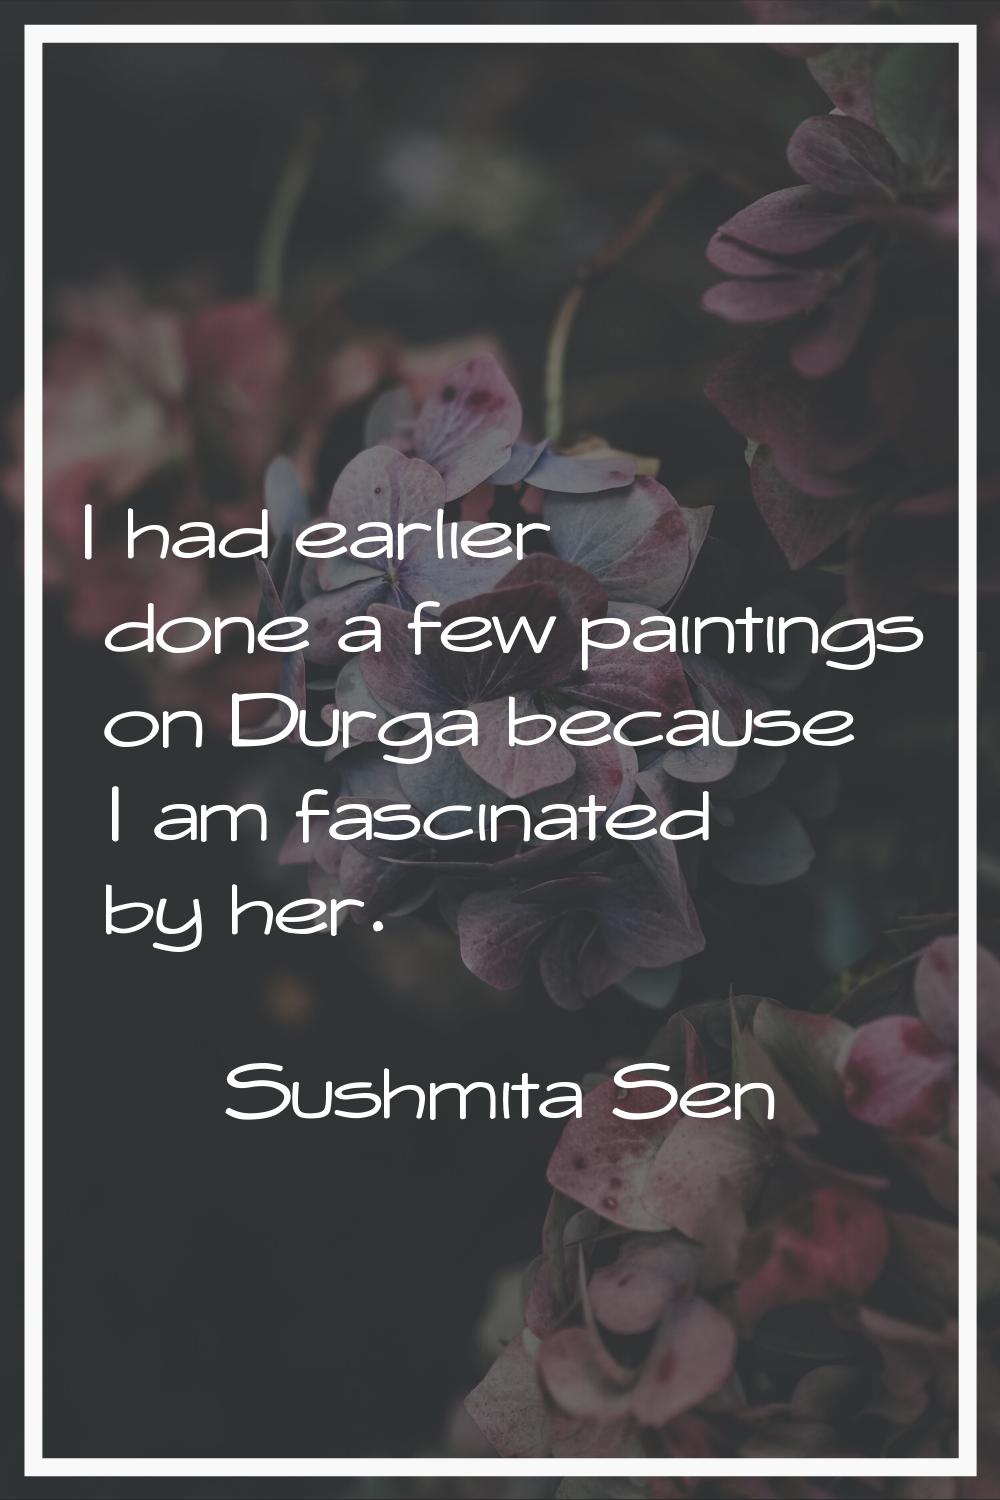 I had earlier done a few paintings on Durga because I am fascinated by her.